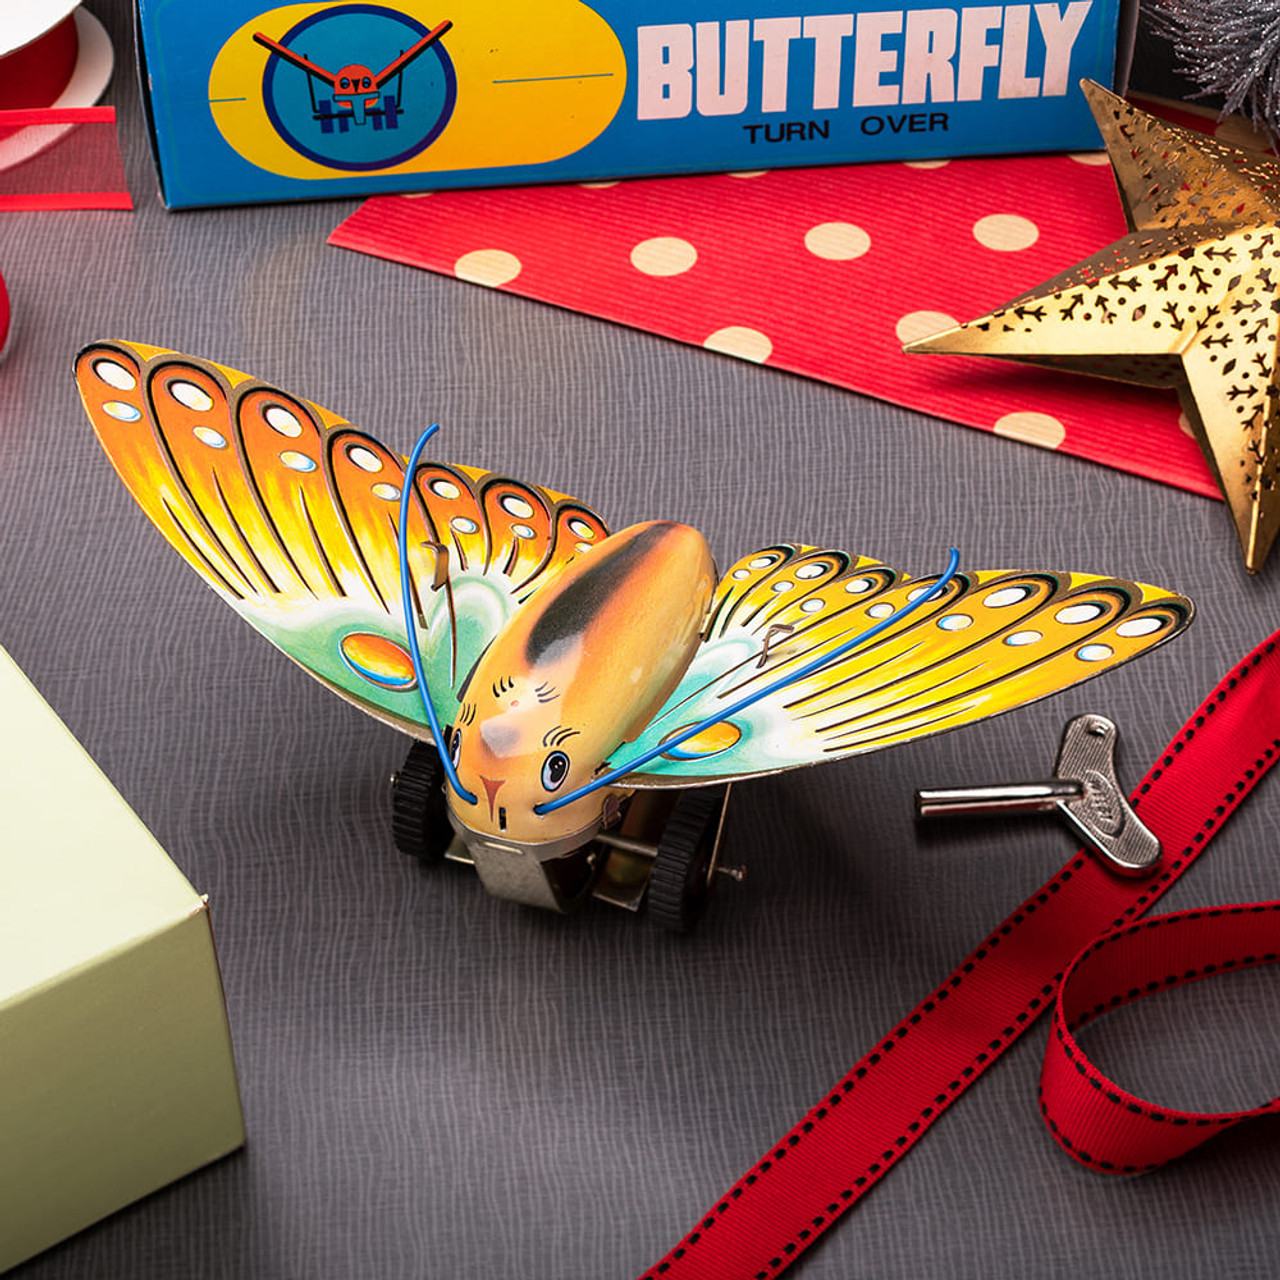 Wind Up Butterfly